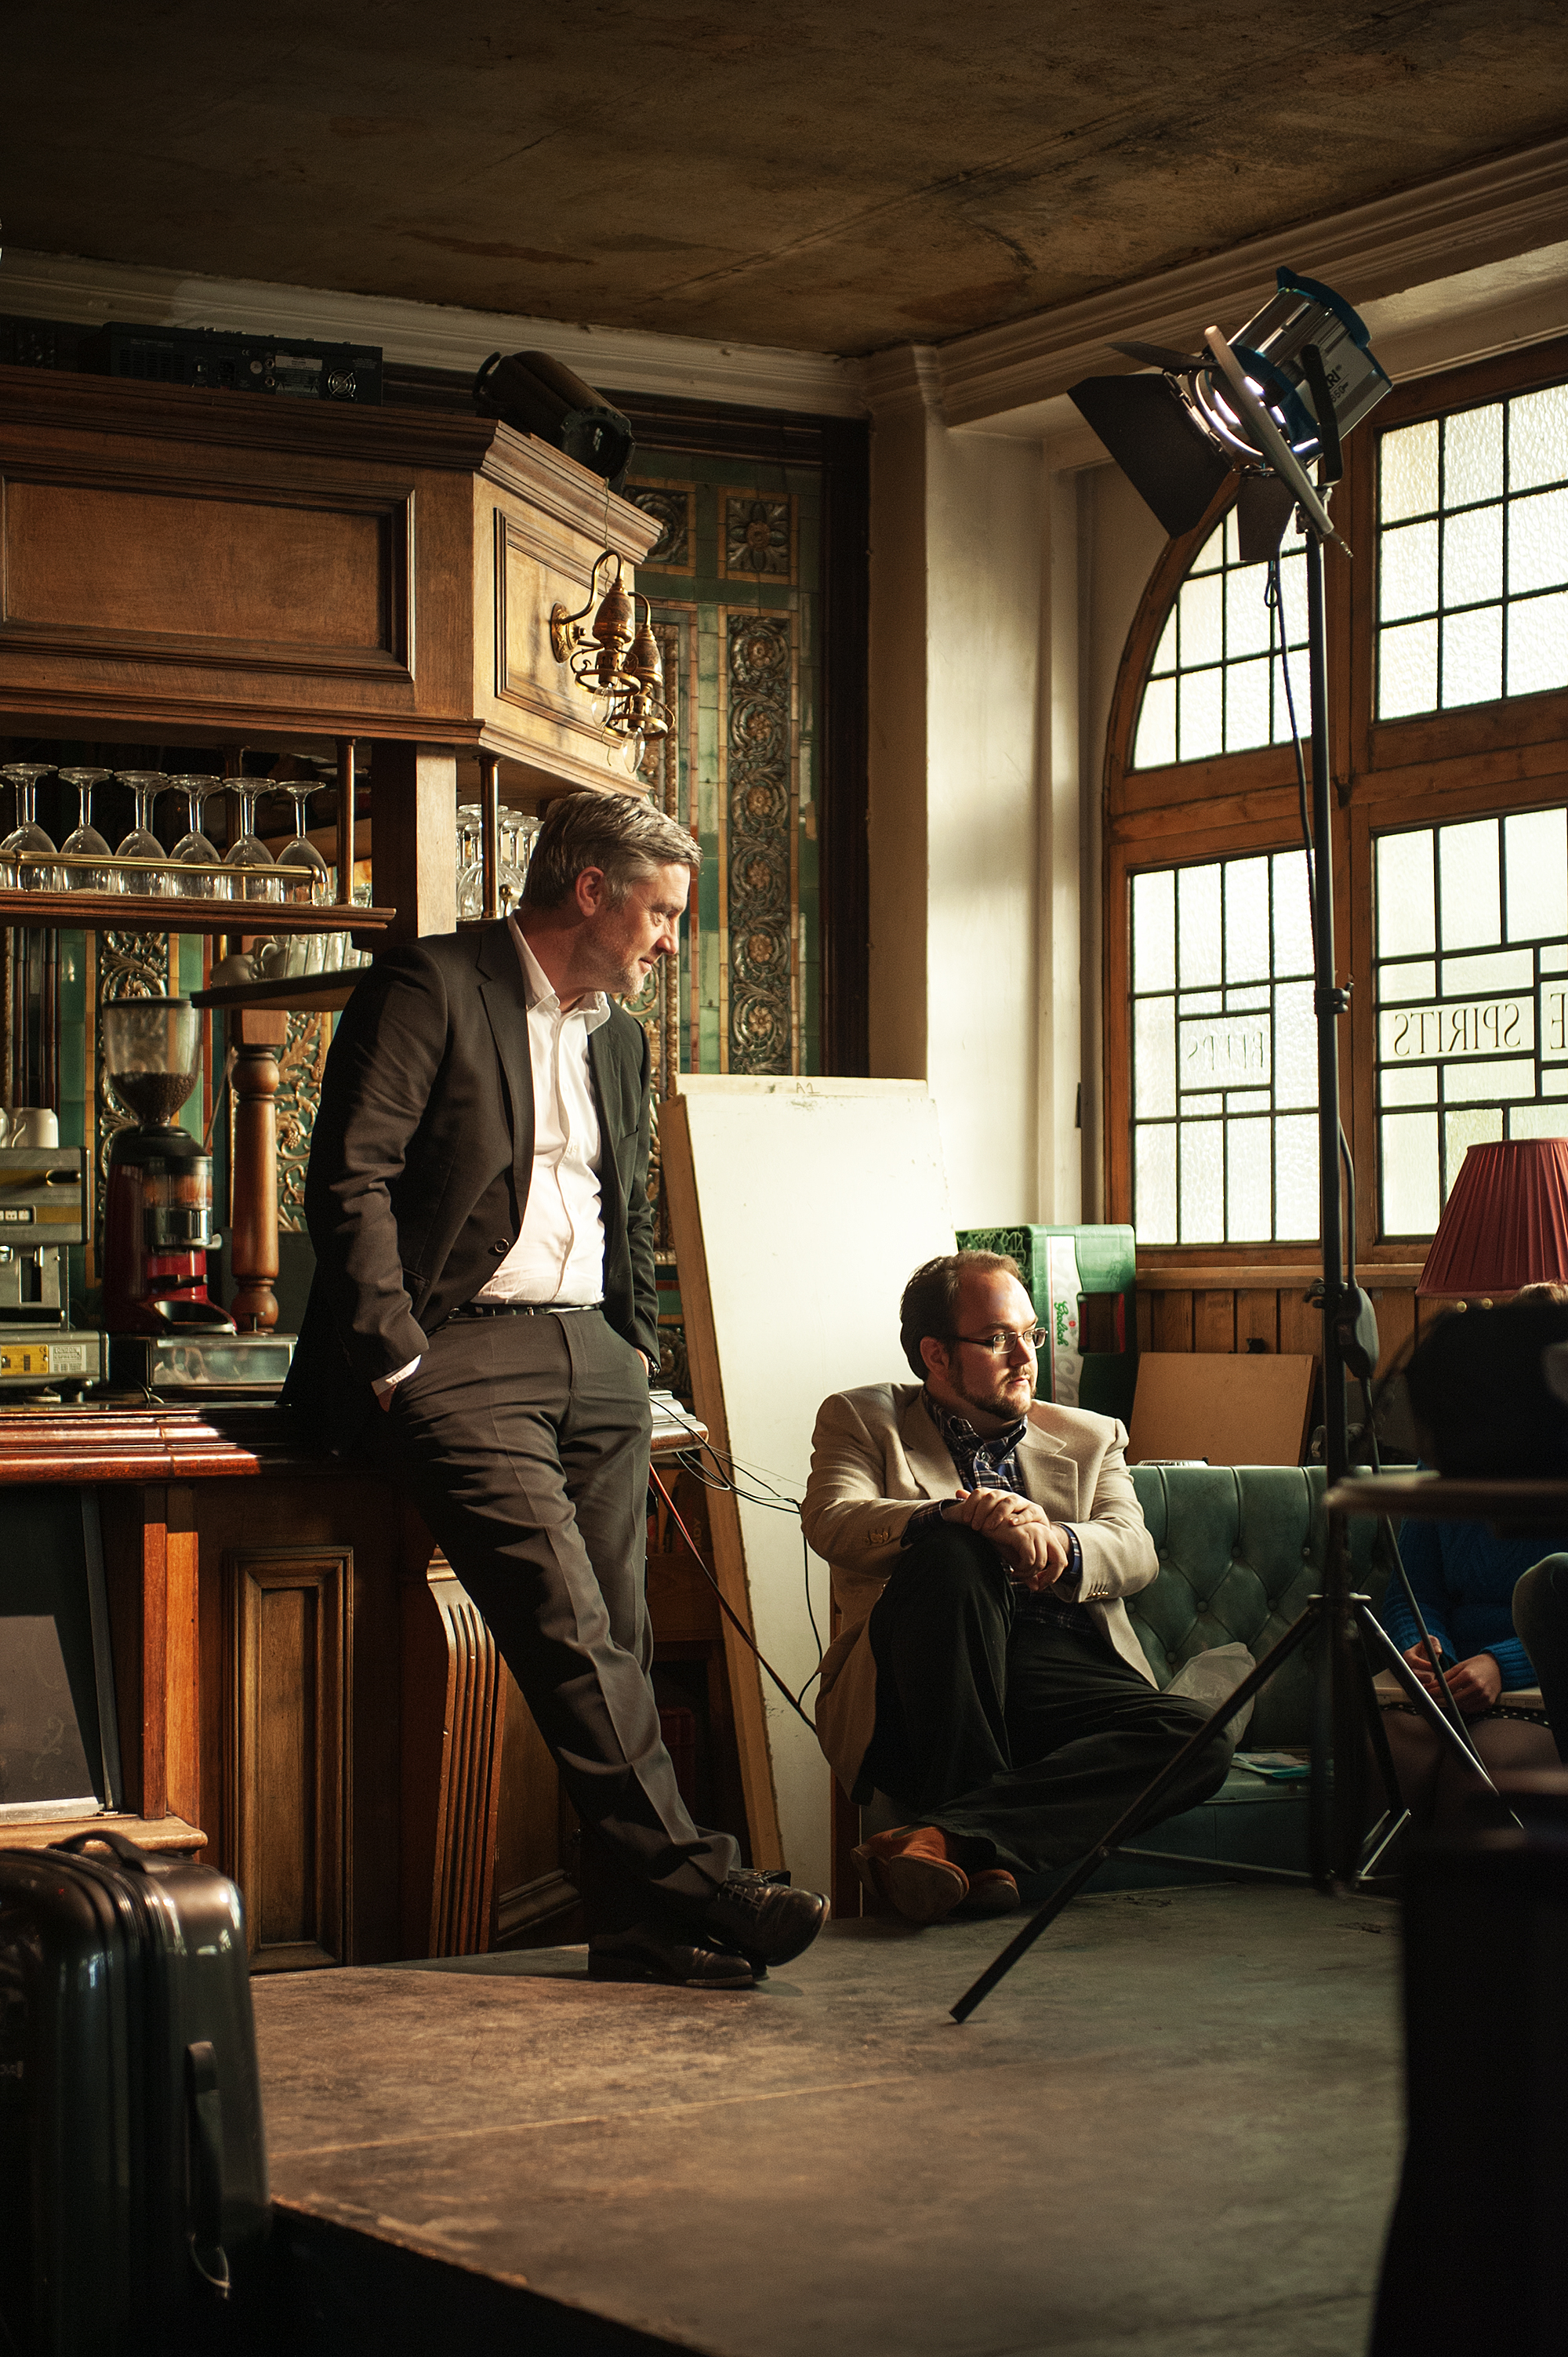 Producer Jonathan Sothcott and actor Vincent Regan on the set of Top Dog